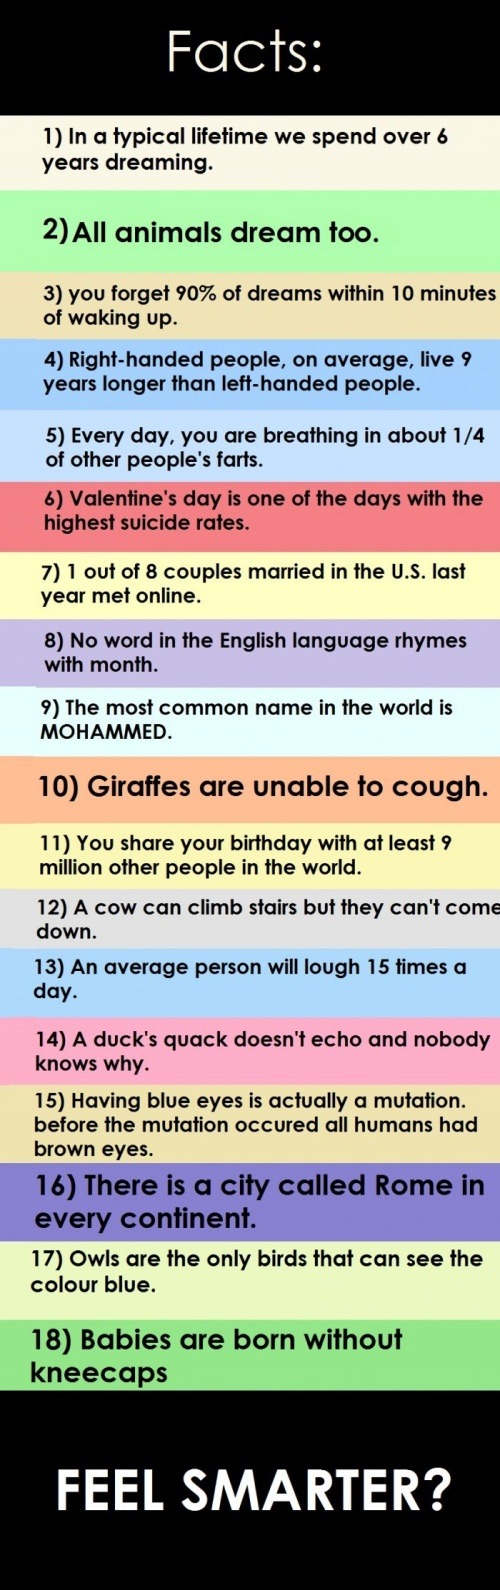 10 pointless things you didn't need to know - meme